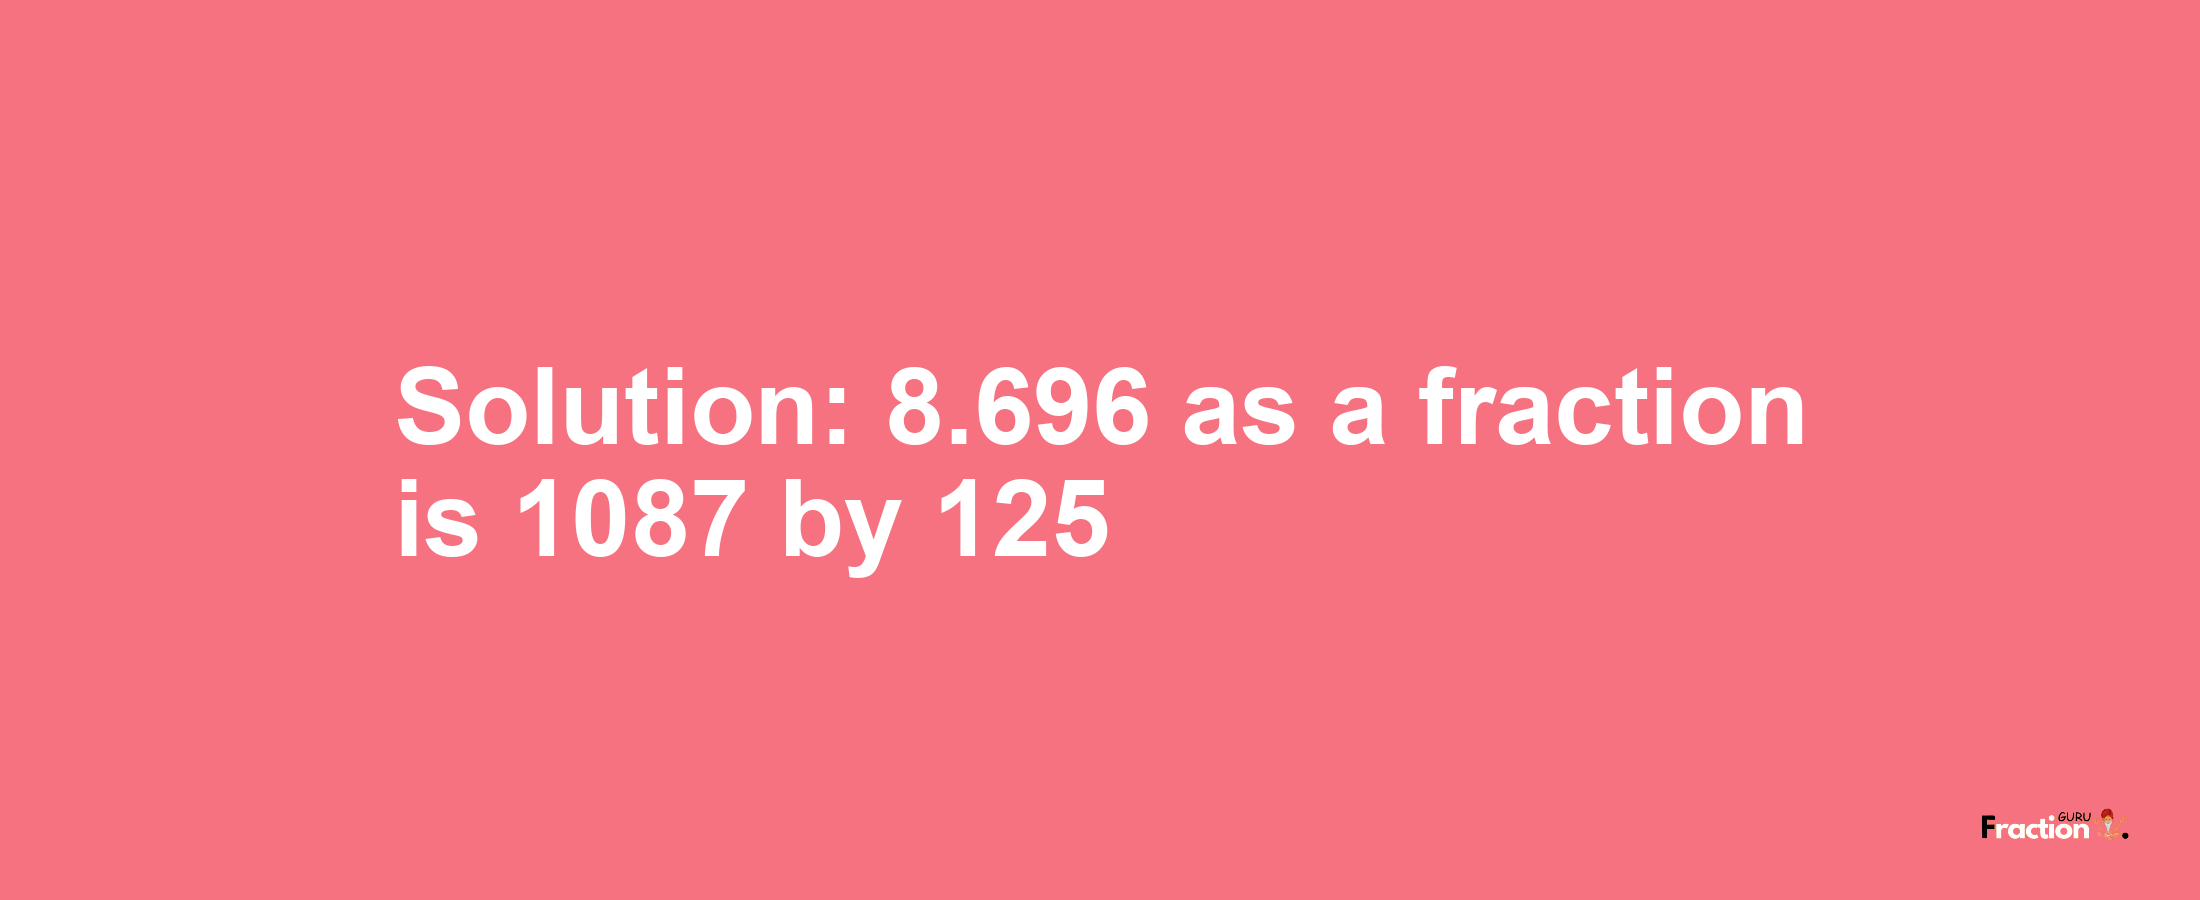 Solution:8.696 as a fraction is 1087/125